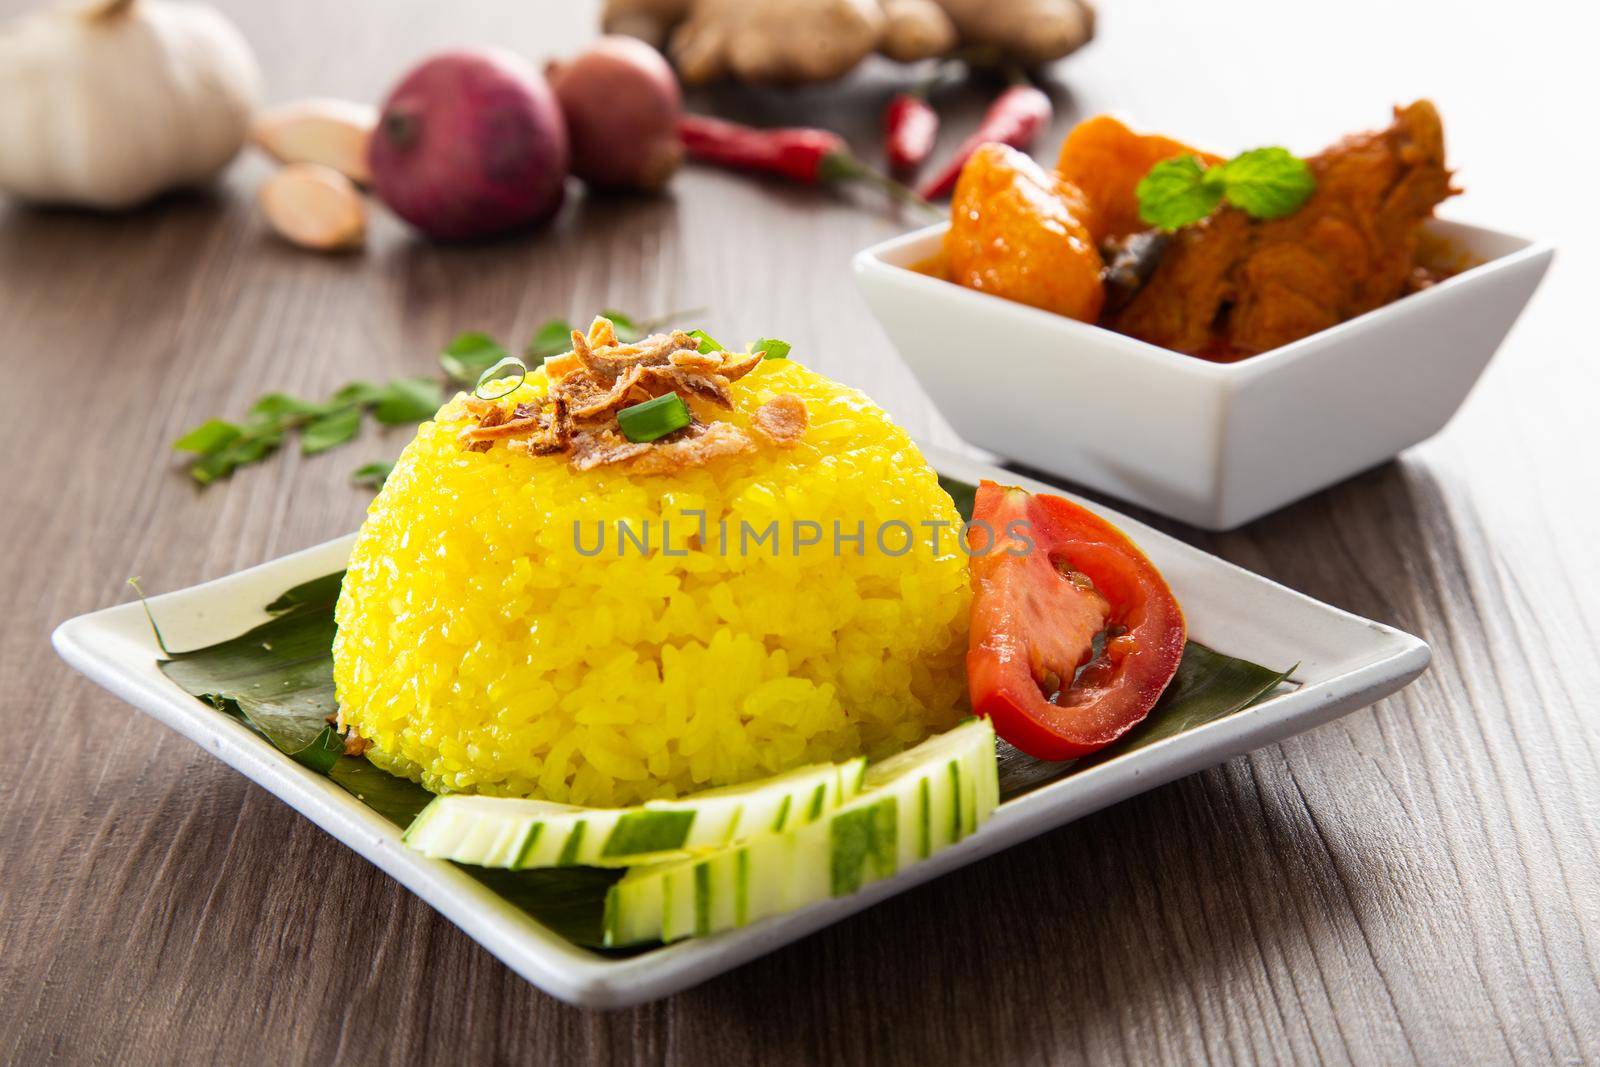 Nasi Kunyit also known as Turmeric Glutinous Rice. Normally eaten with dry curry chicken. by tehcheesiong